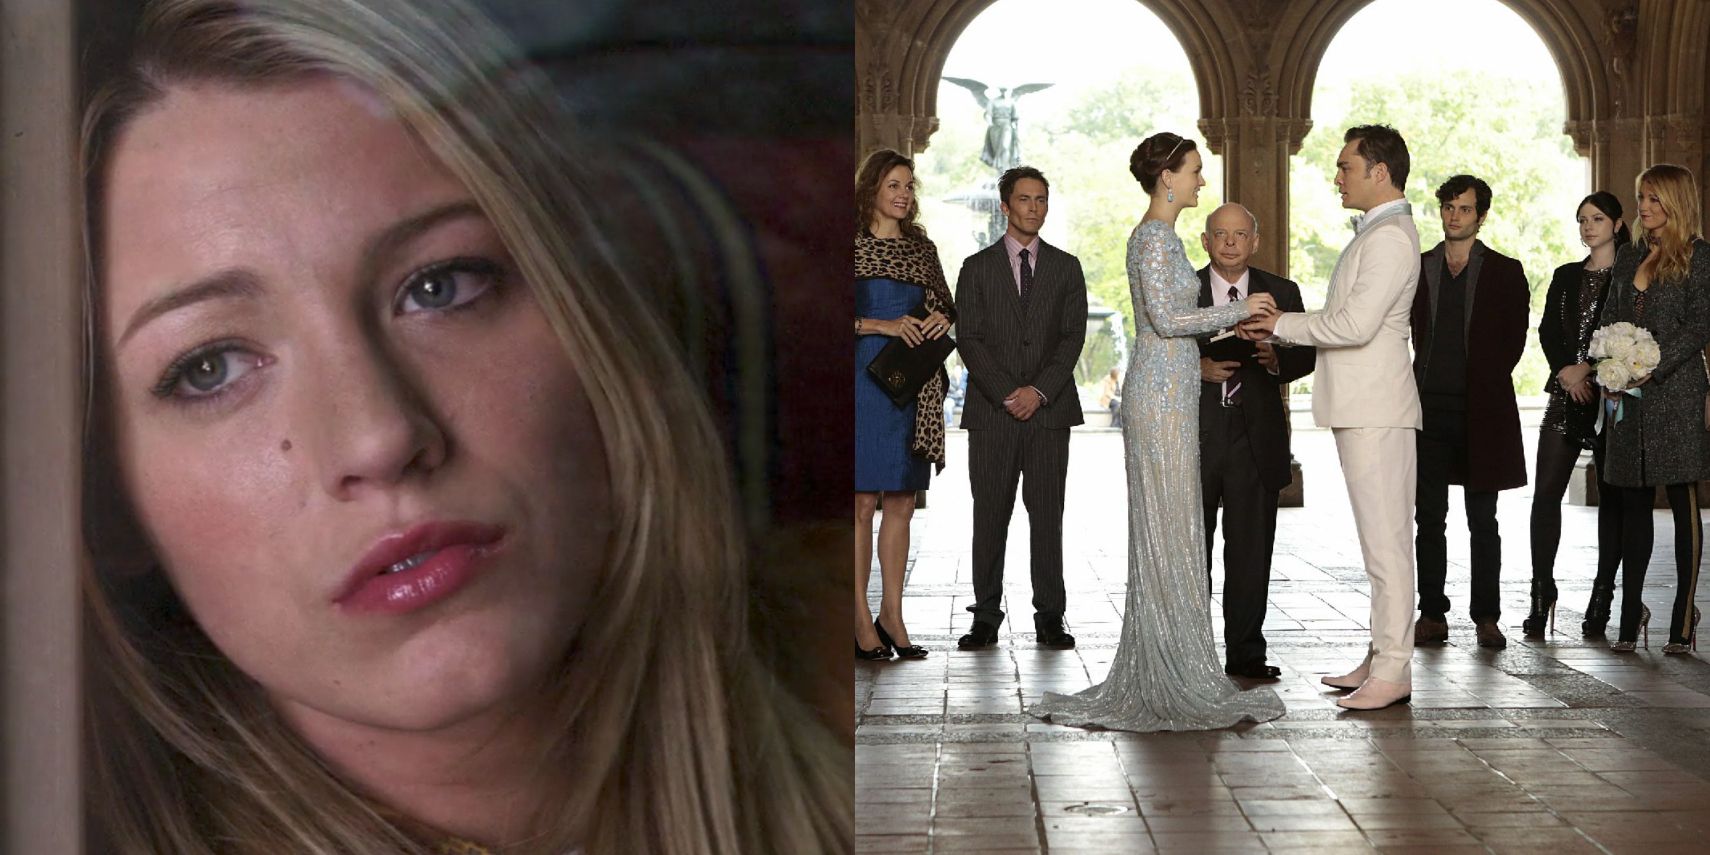 Gossip Girl: 10 Things From Season 1 That Keep Getting Better Over Time